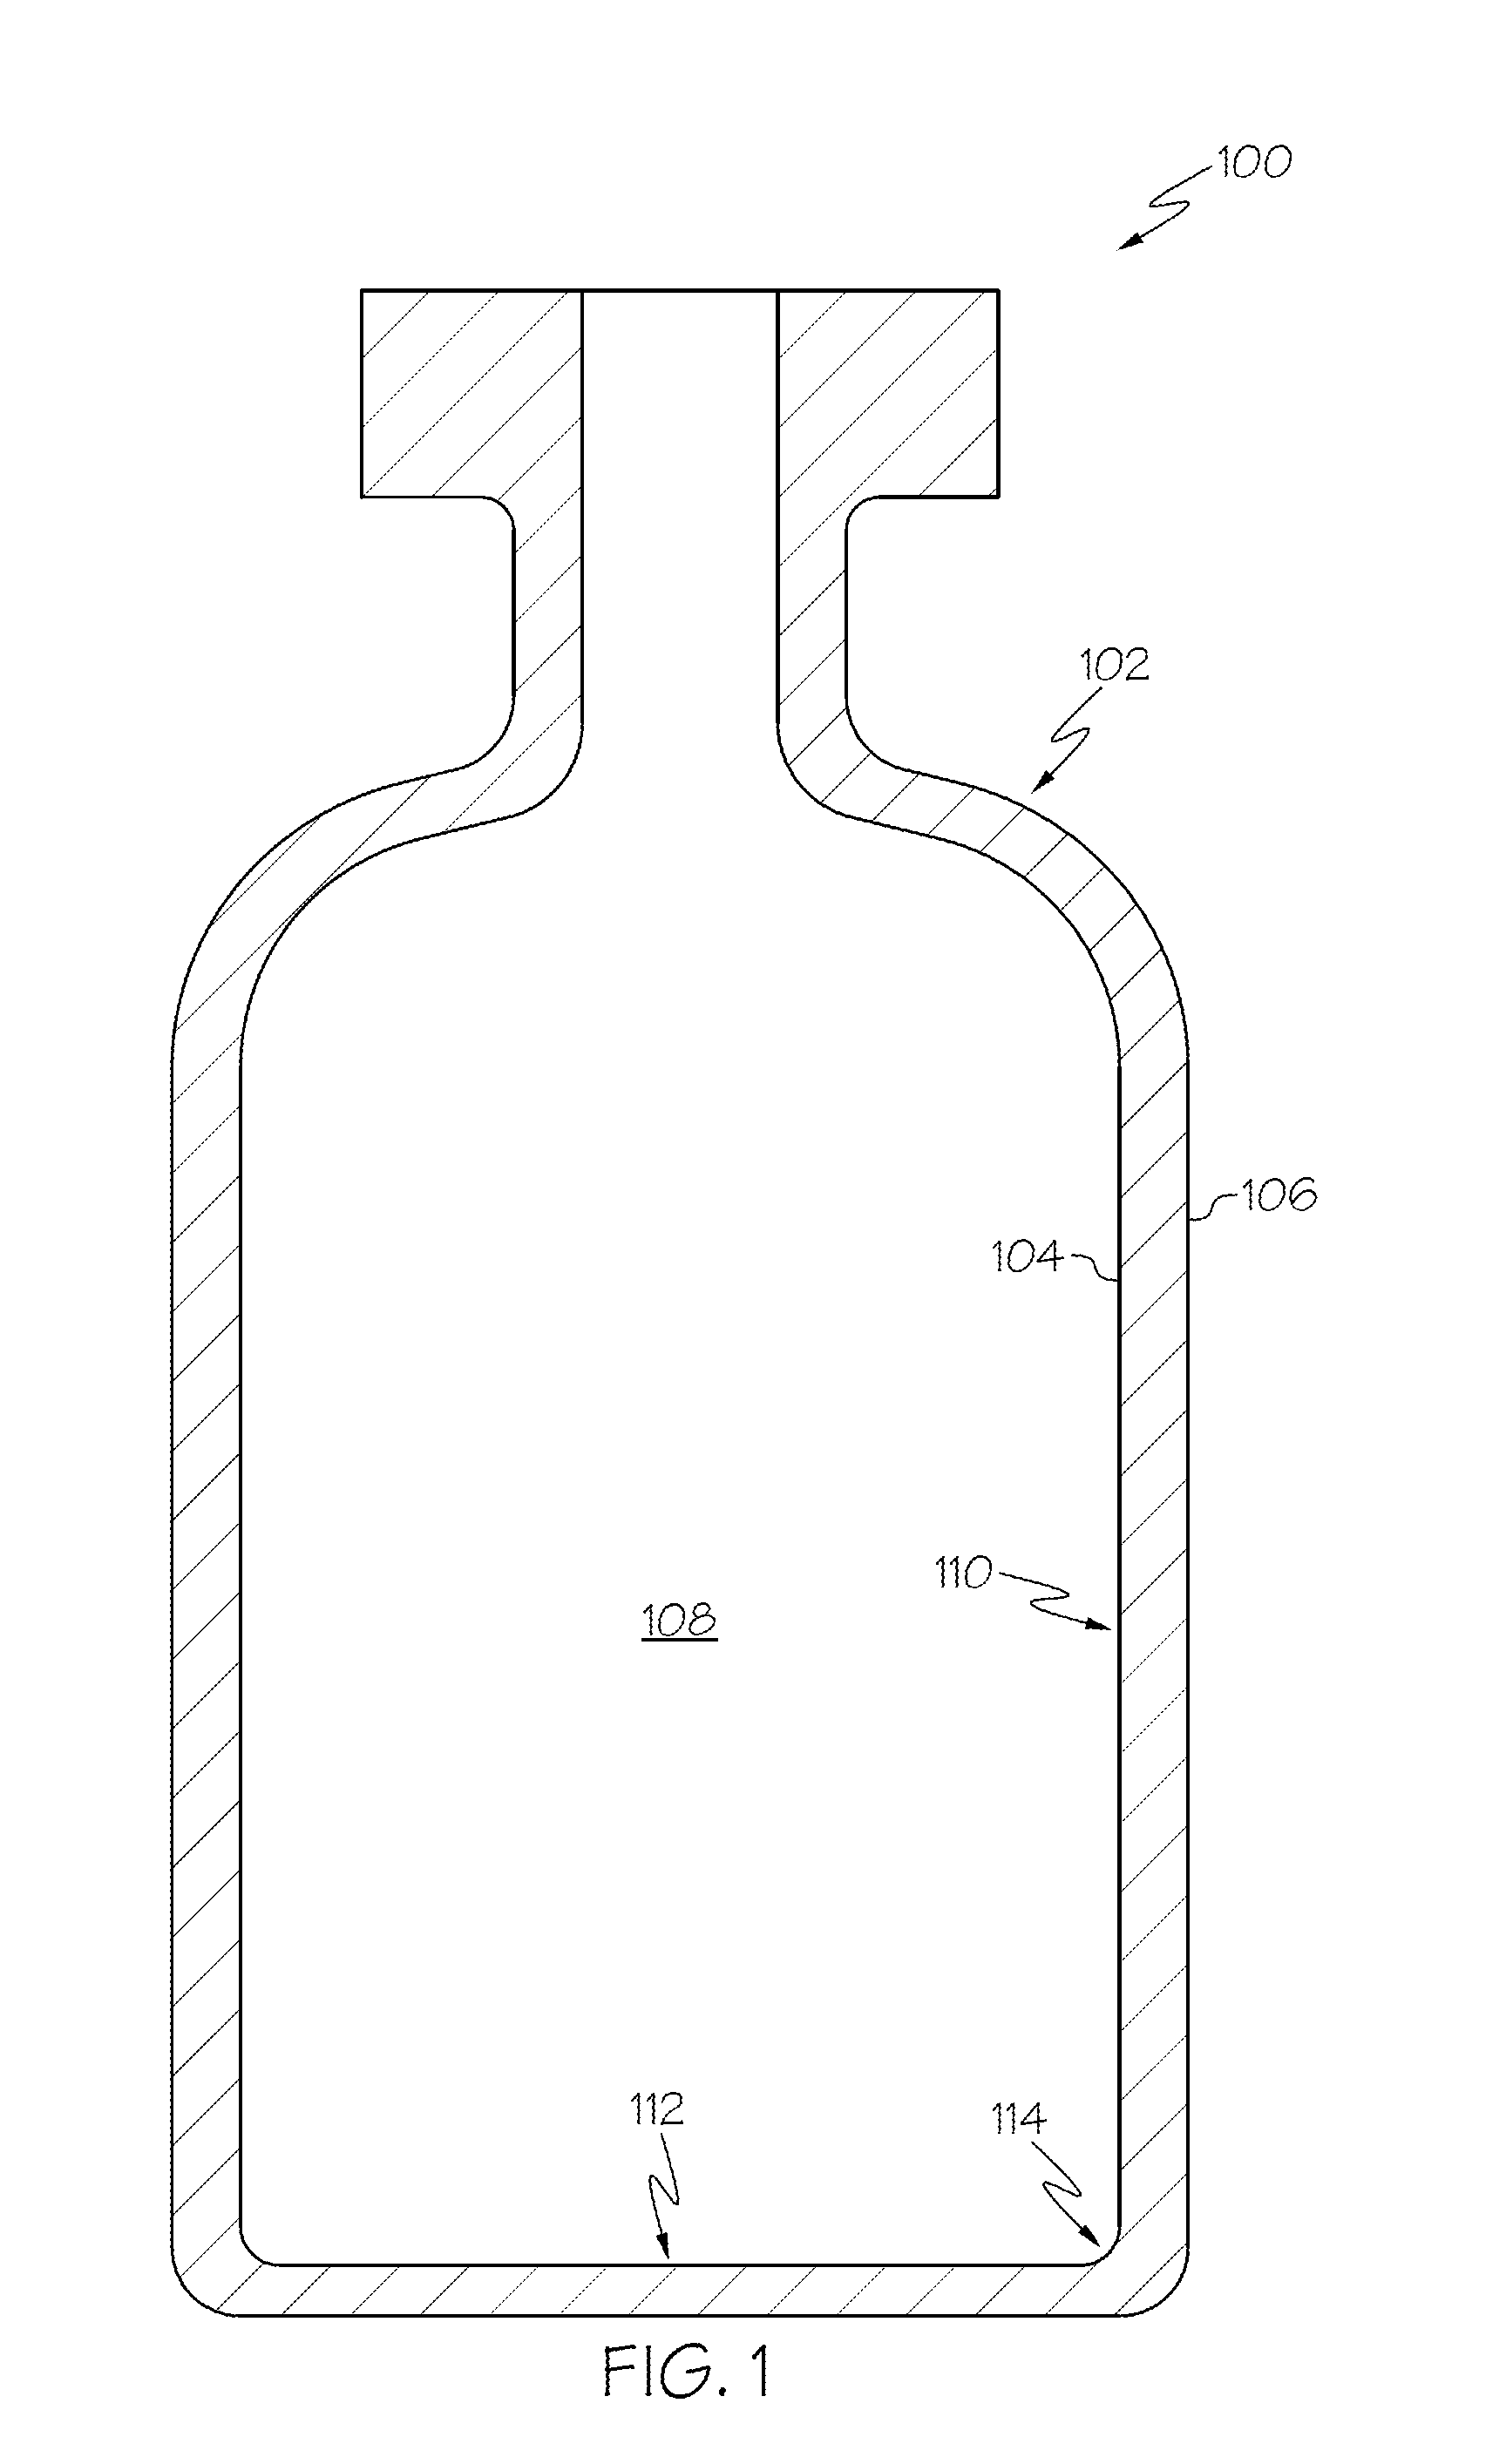 Methods for producing strengthened and durable glass containers